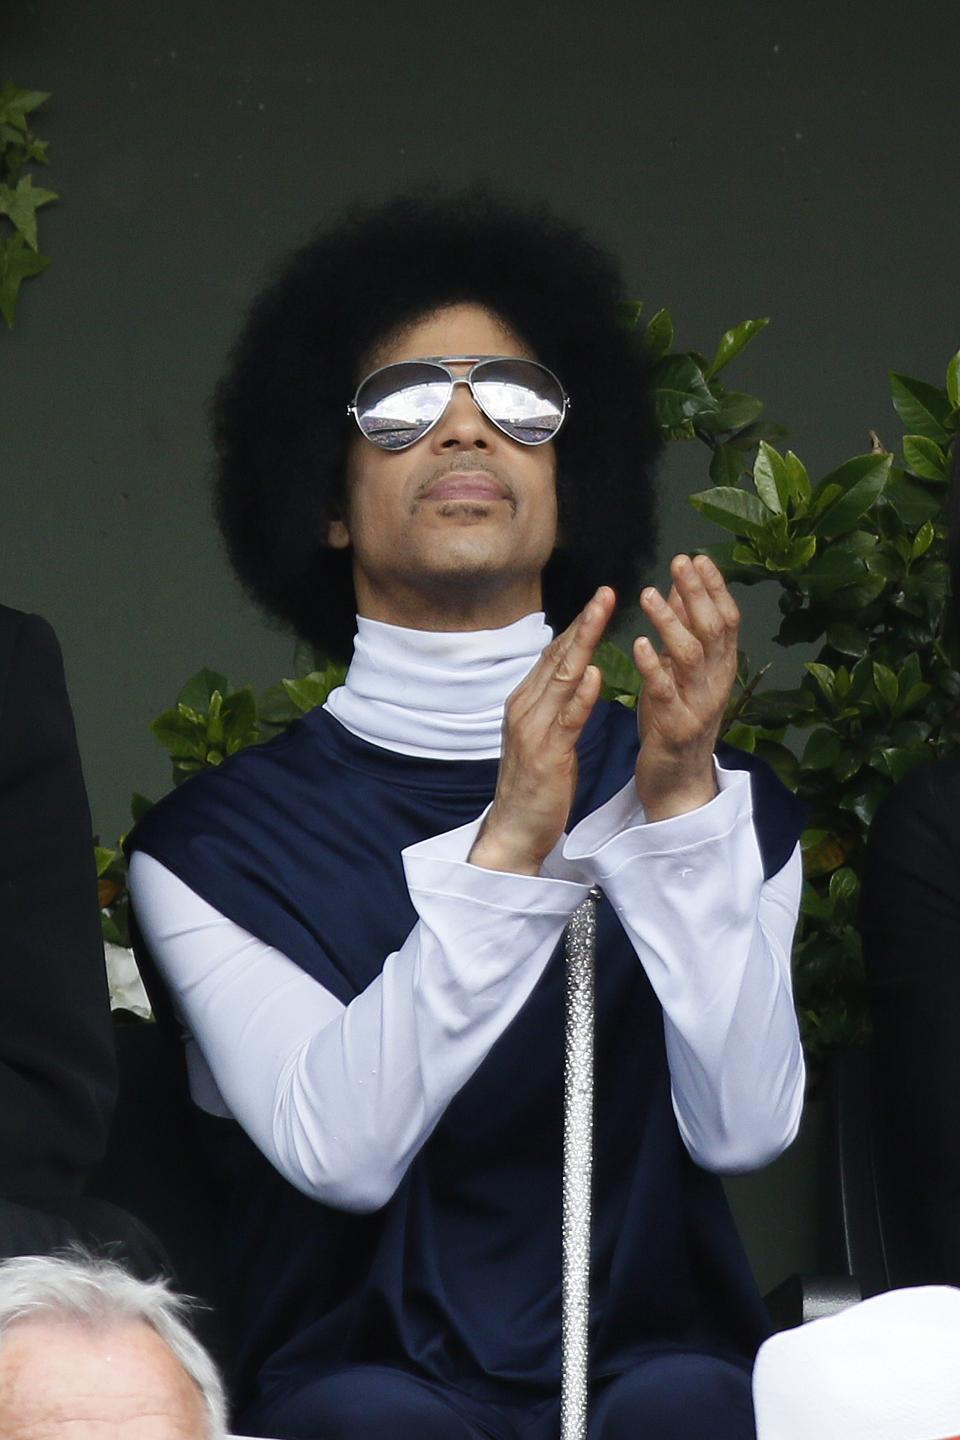 US singer Prince attends the French tennis Open round of sixteen match between Spain's Rafael Nadal and Serbia's Dusan Lajovic at the Roland Garros stadium in Paris on June 2, 2014.  AFP PHOTO / PATRICK KOVARIK        (Photo credit should read PATRICK KOVARIK/AFP/Getty Images)